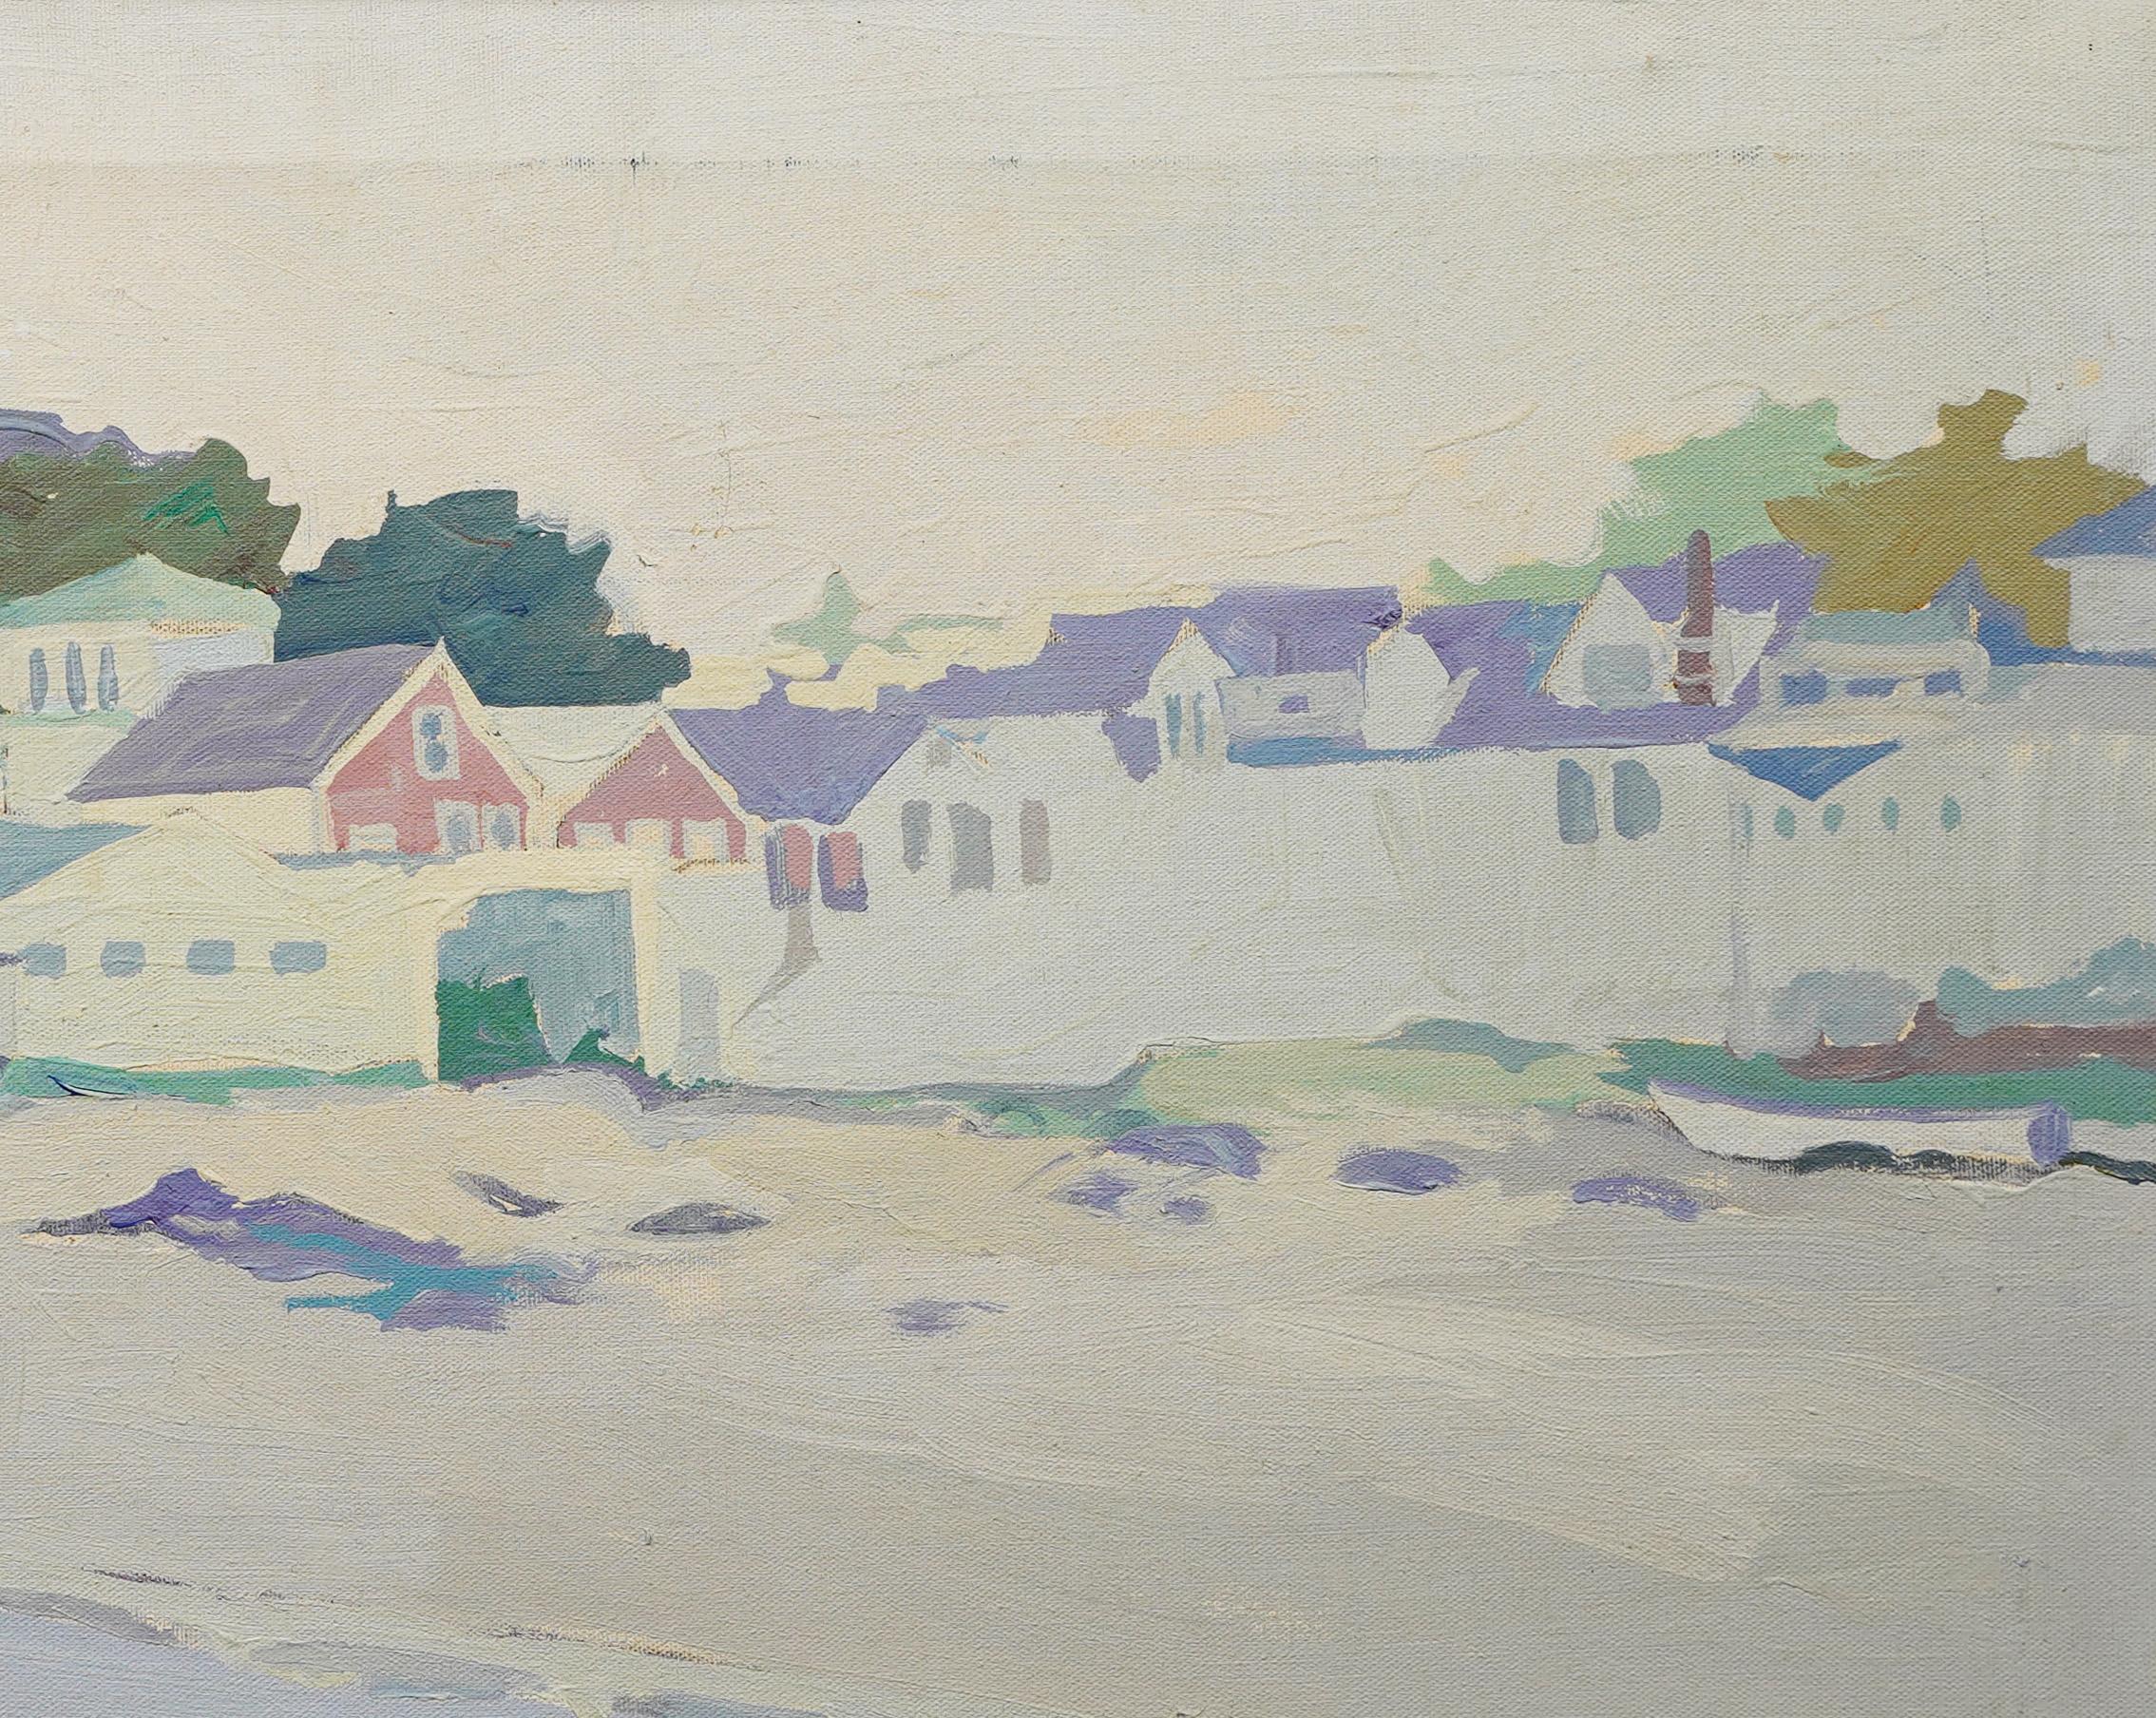  New England Beach Town Fauvist Palette Modernist Framed Large Oil Painting For Sale 4